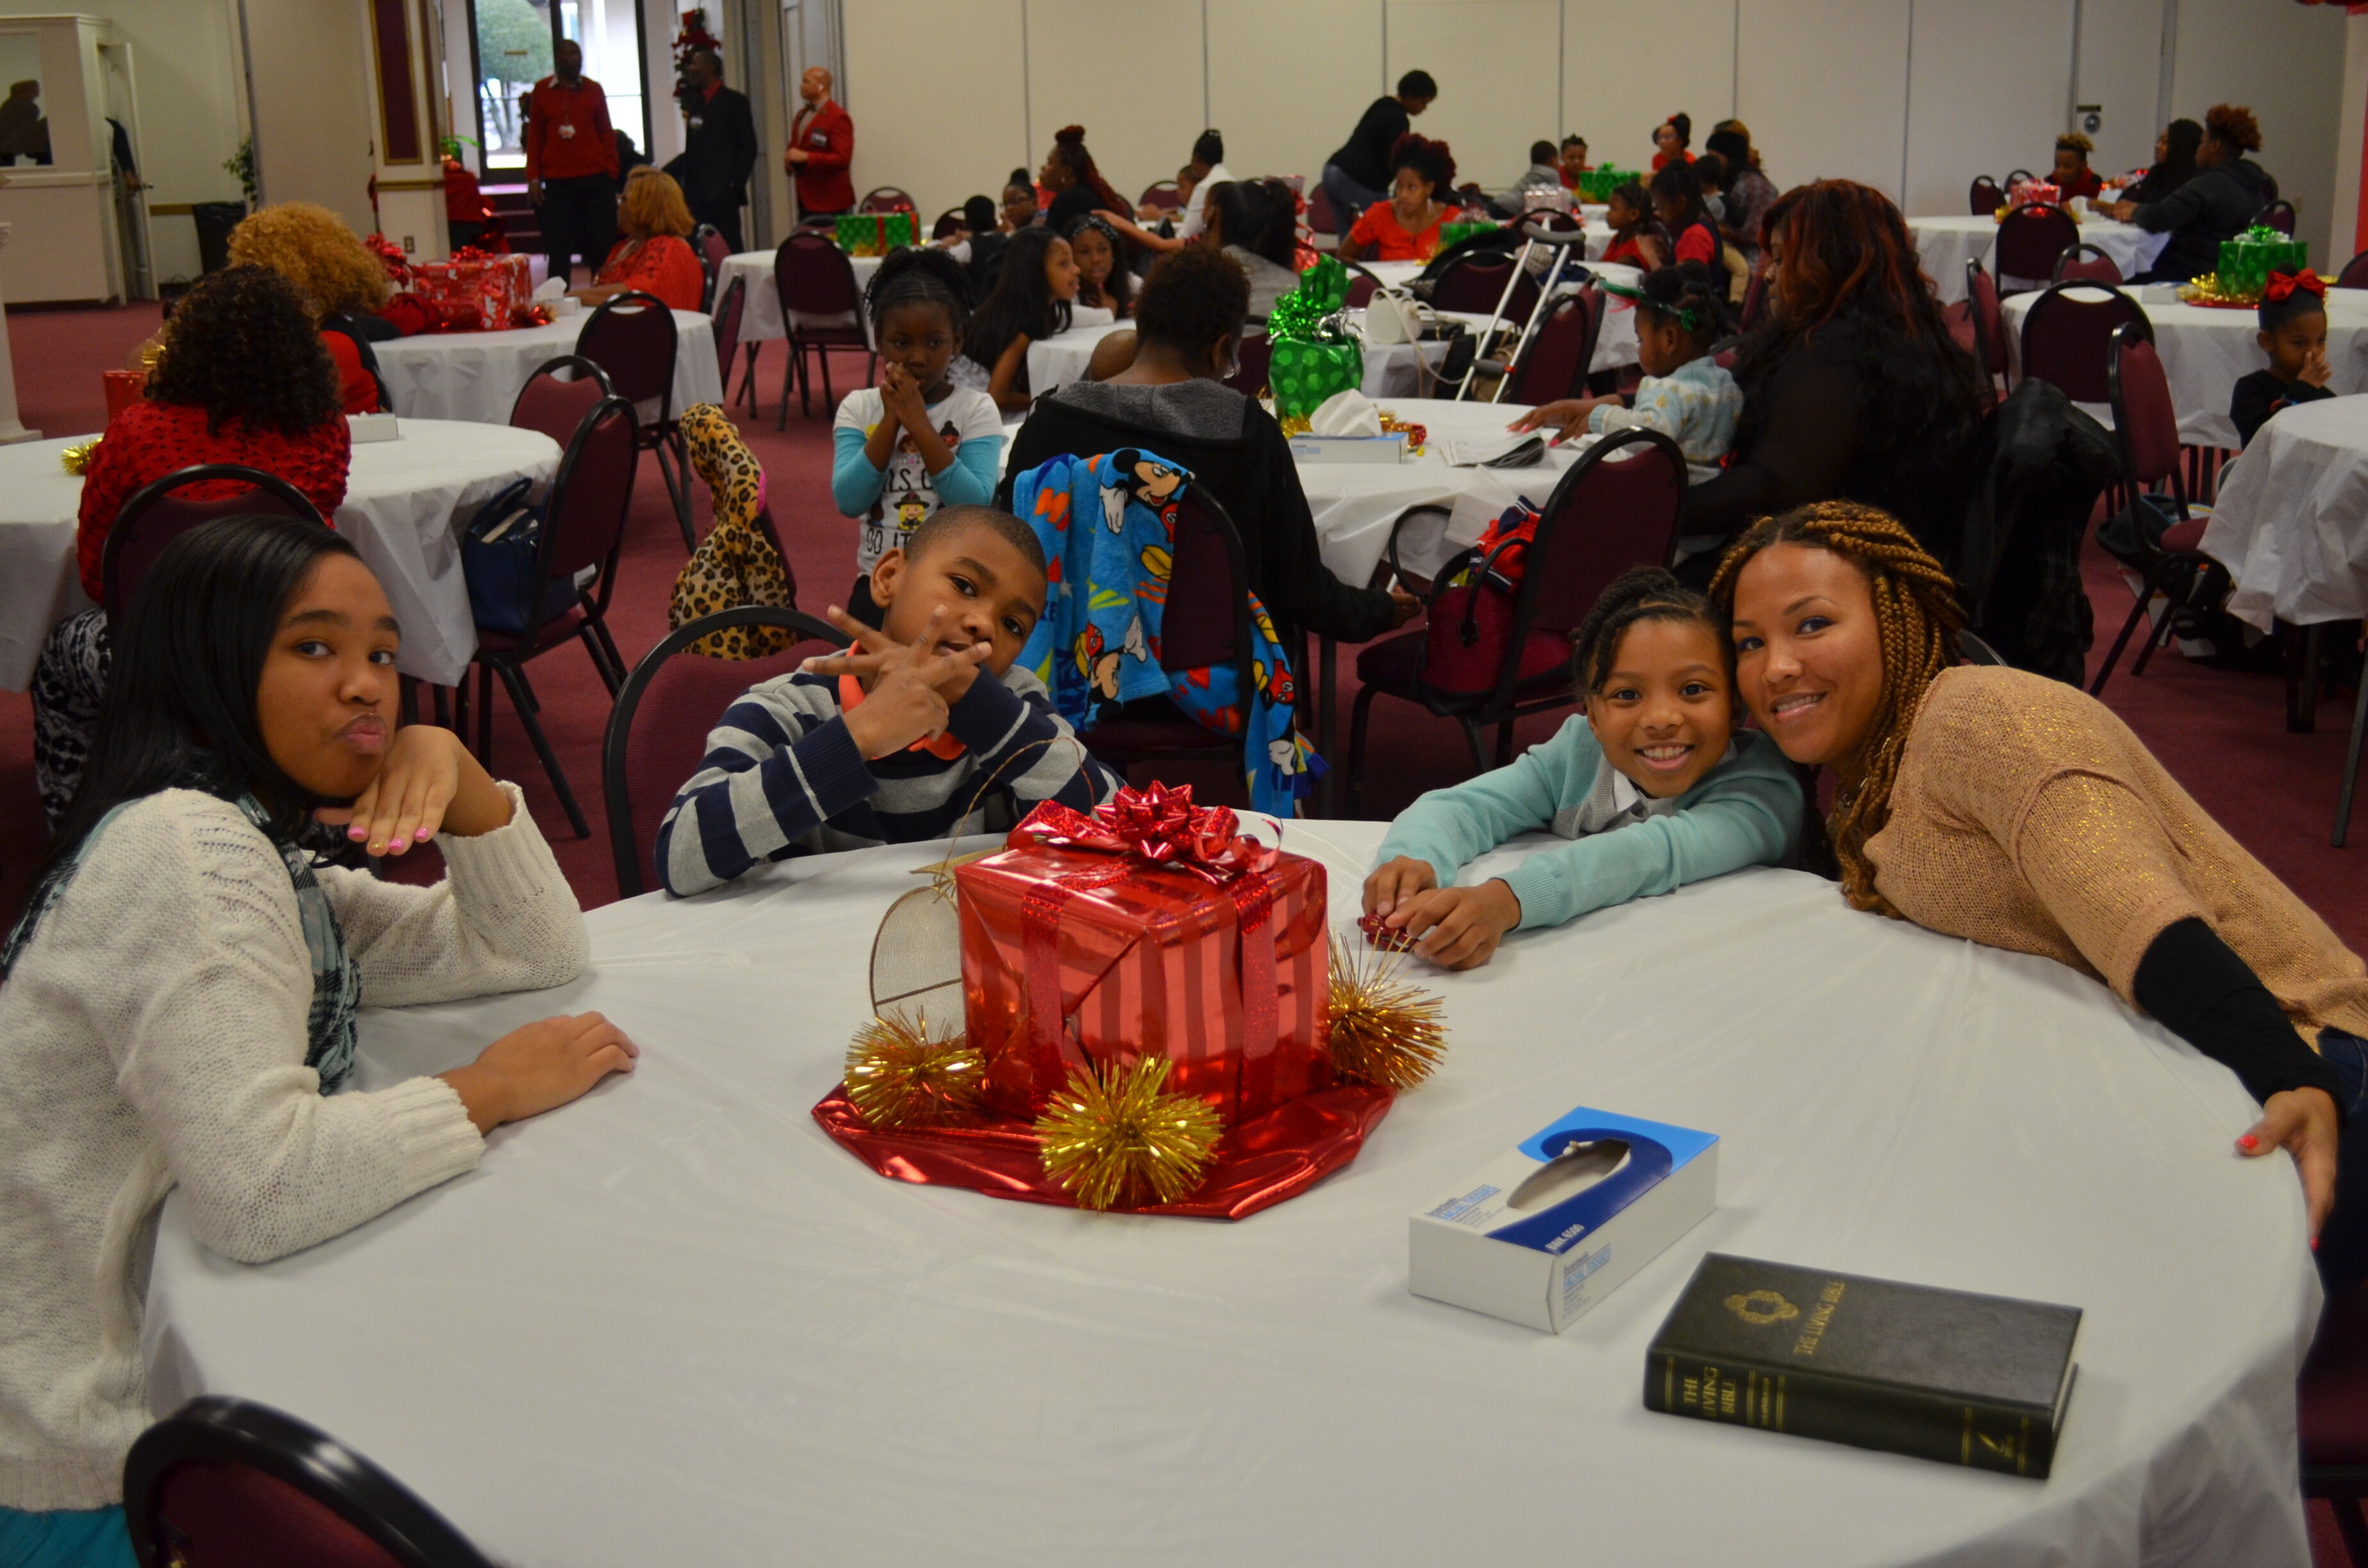 World Overcomers Church has hosted previous events for single mothers in their own congregation. This year's Christmas expo event is the first event for single moms that is open to the broader community. (Terrance Davis)